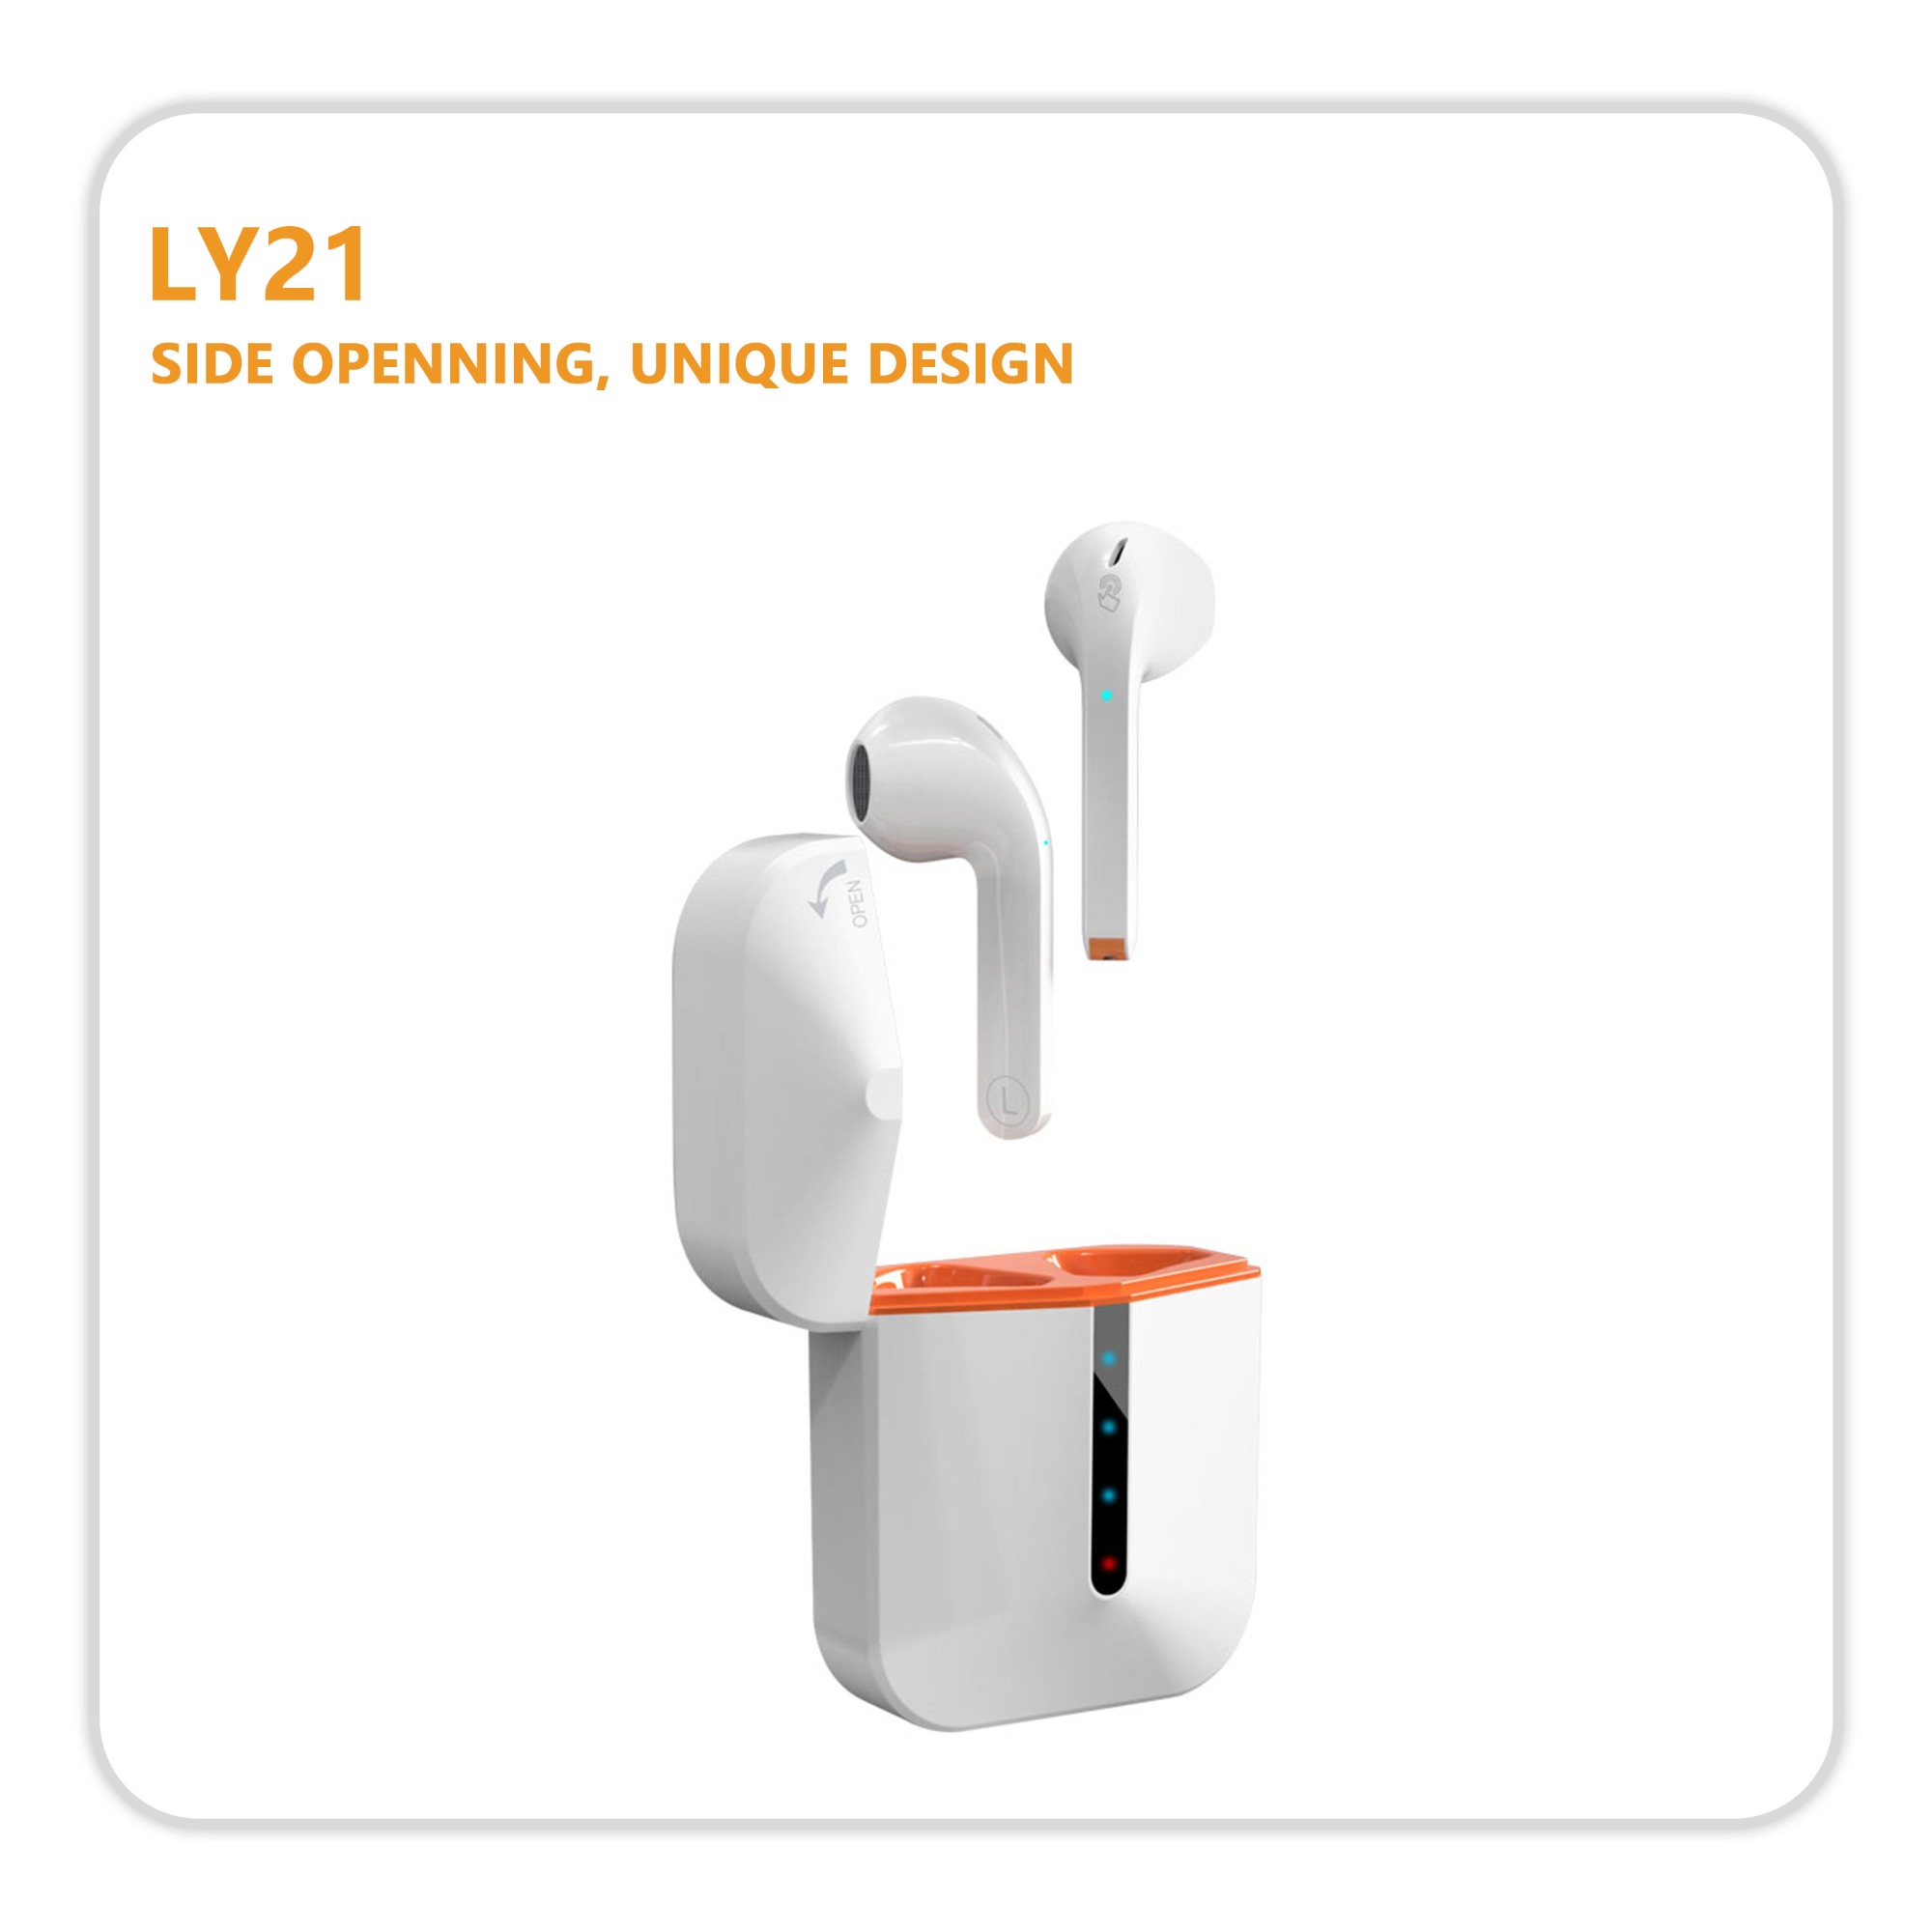 LY21 SIDE OPENNED DESIGN